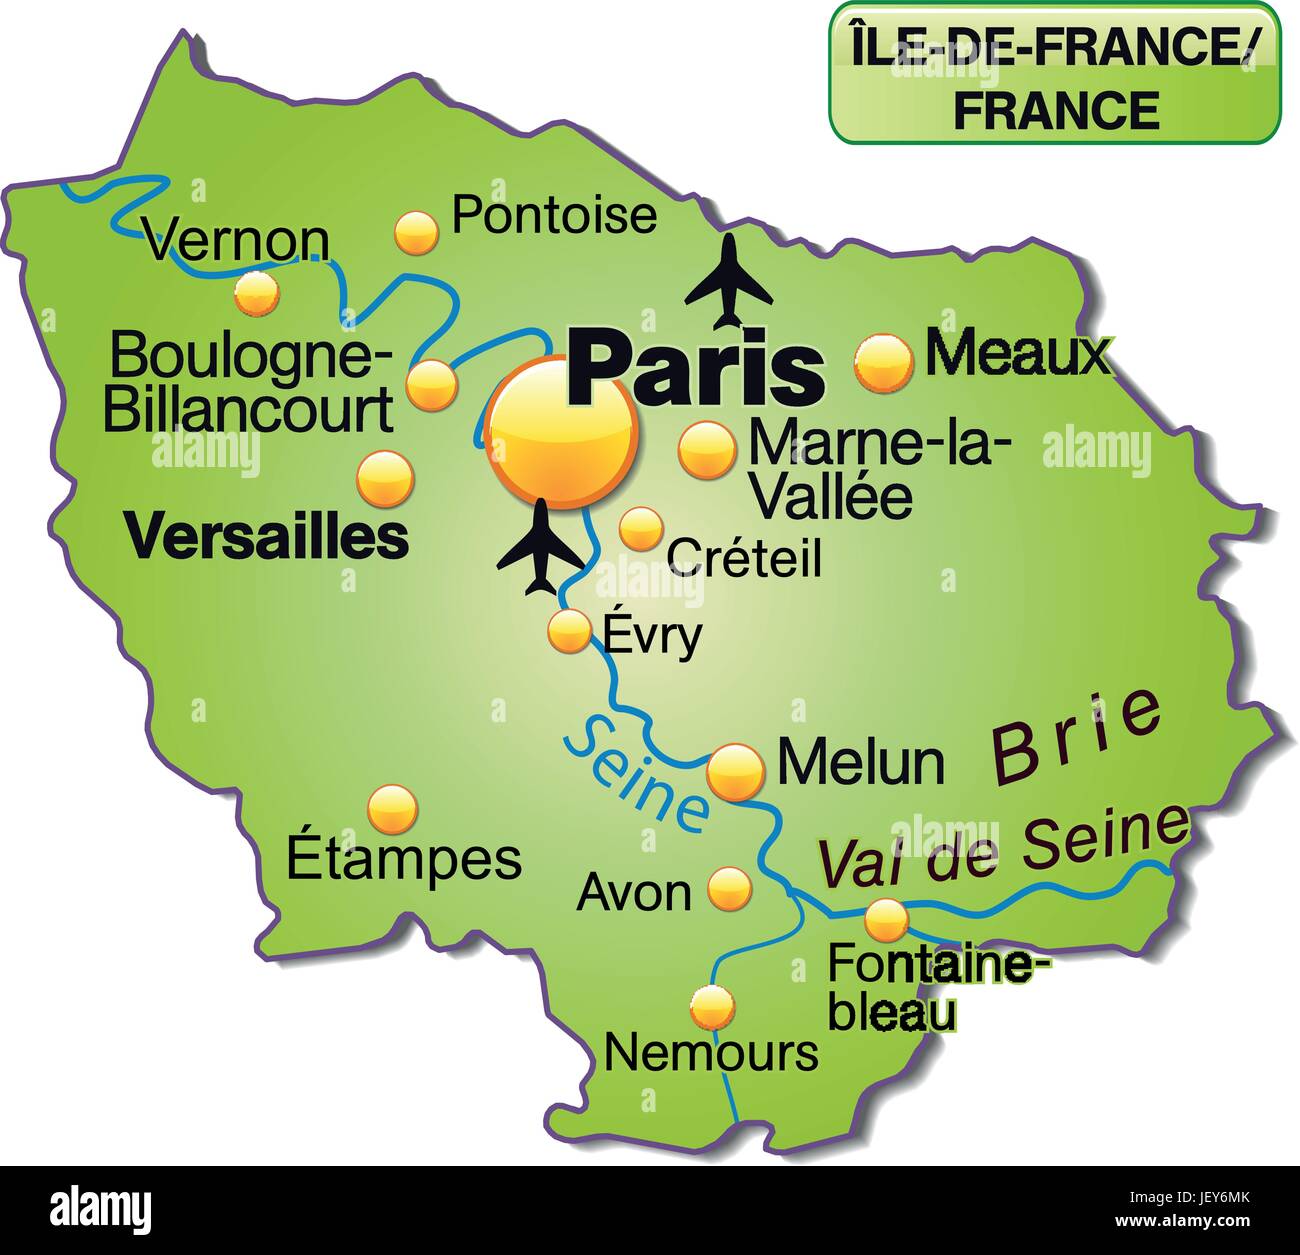 Map Of Ile De France As An Overview Map In Green JEY6MK 